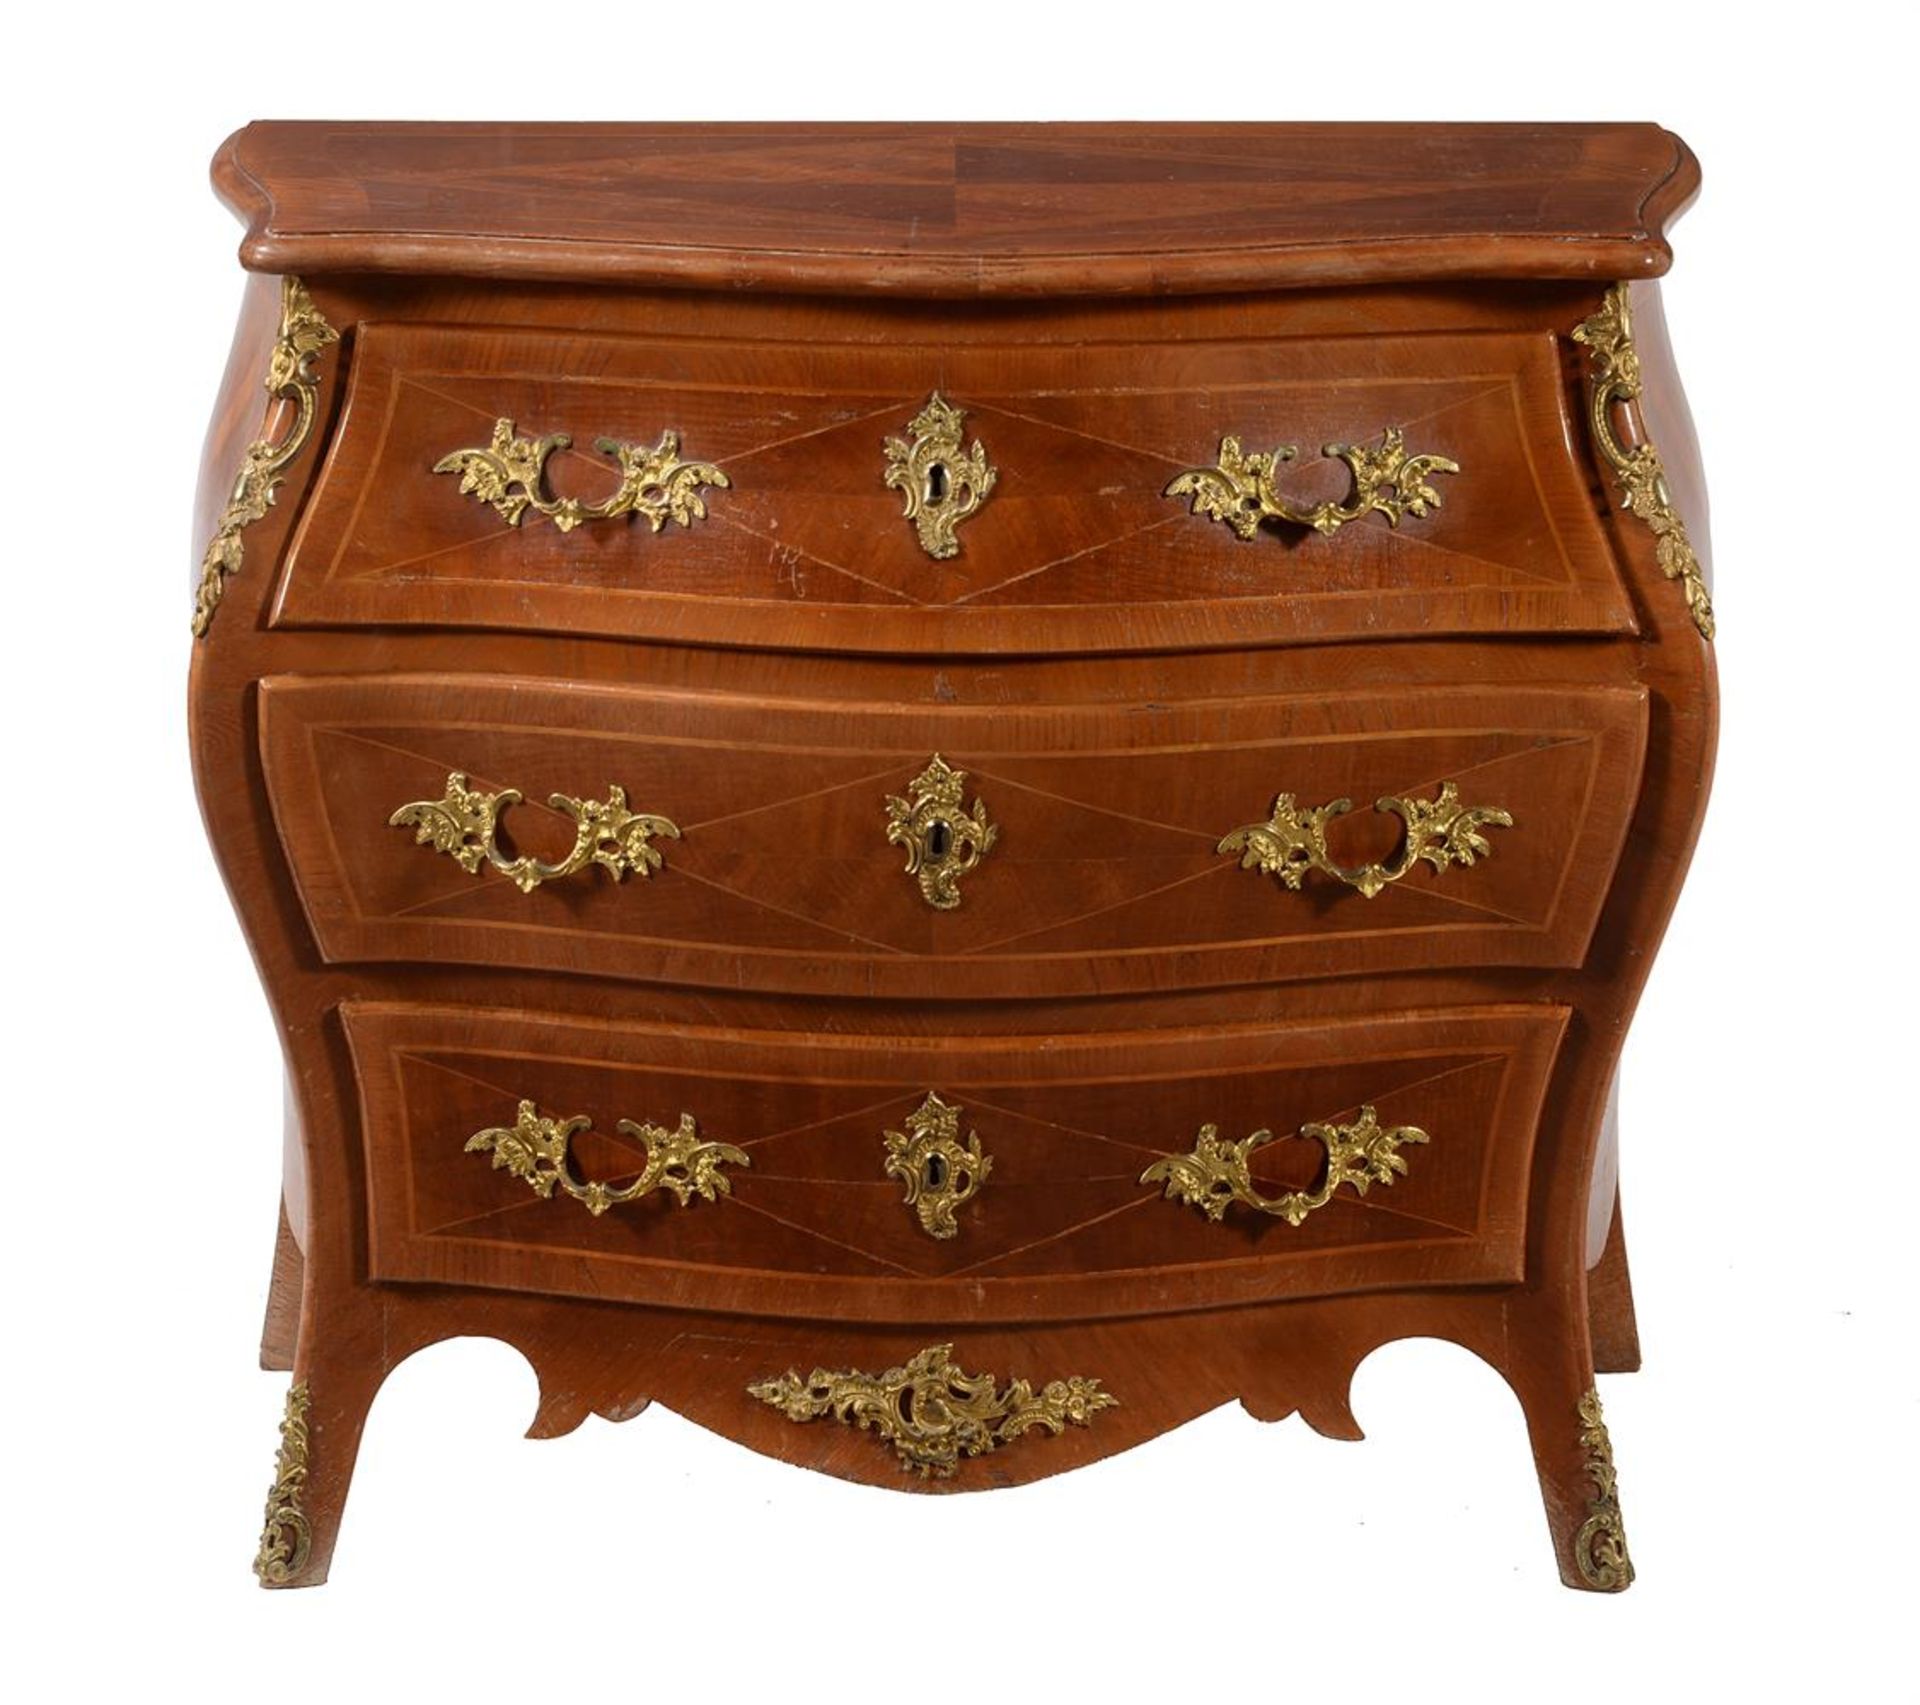 Y A French chestnut and kingwood banded commode in Louis XV/XVI transitional style